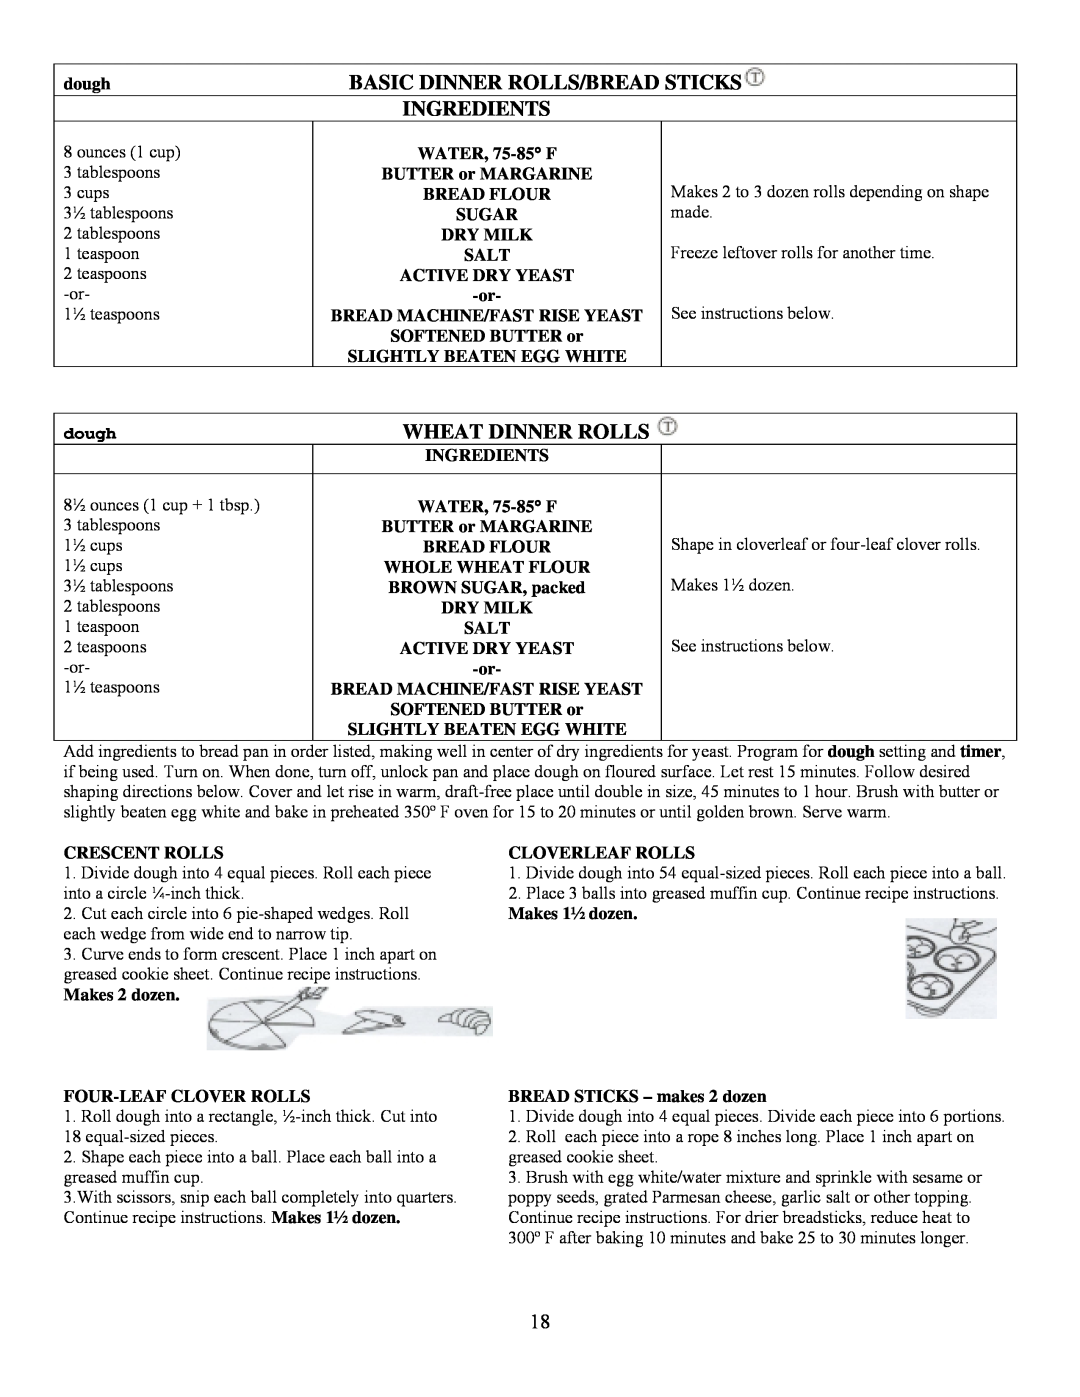 West Bend L5231 important safety instructions Basic Dinner Rolls/Bread Sticks, Ingredients, Wheat Dinner Rolls, dough 